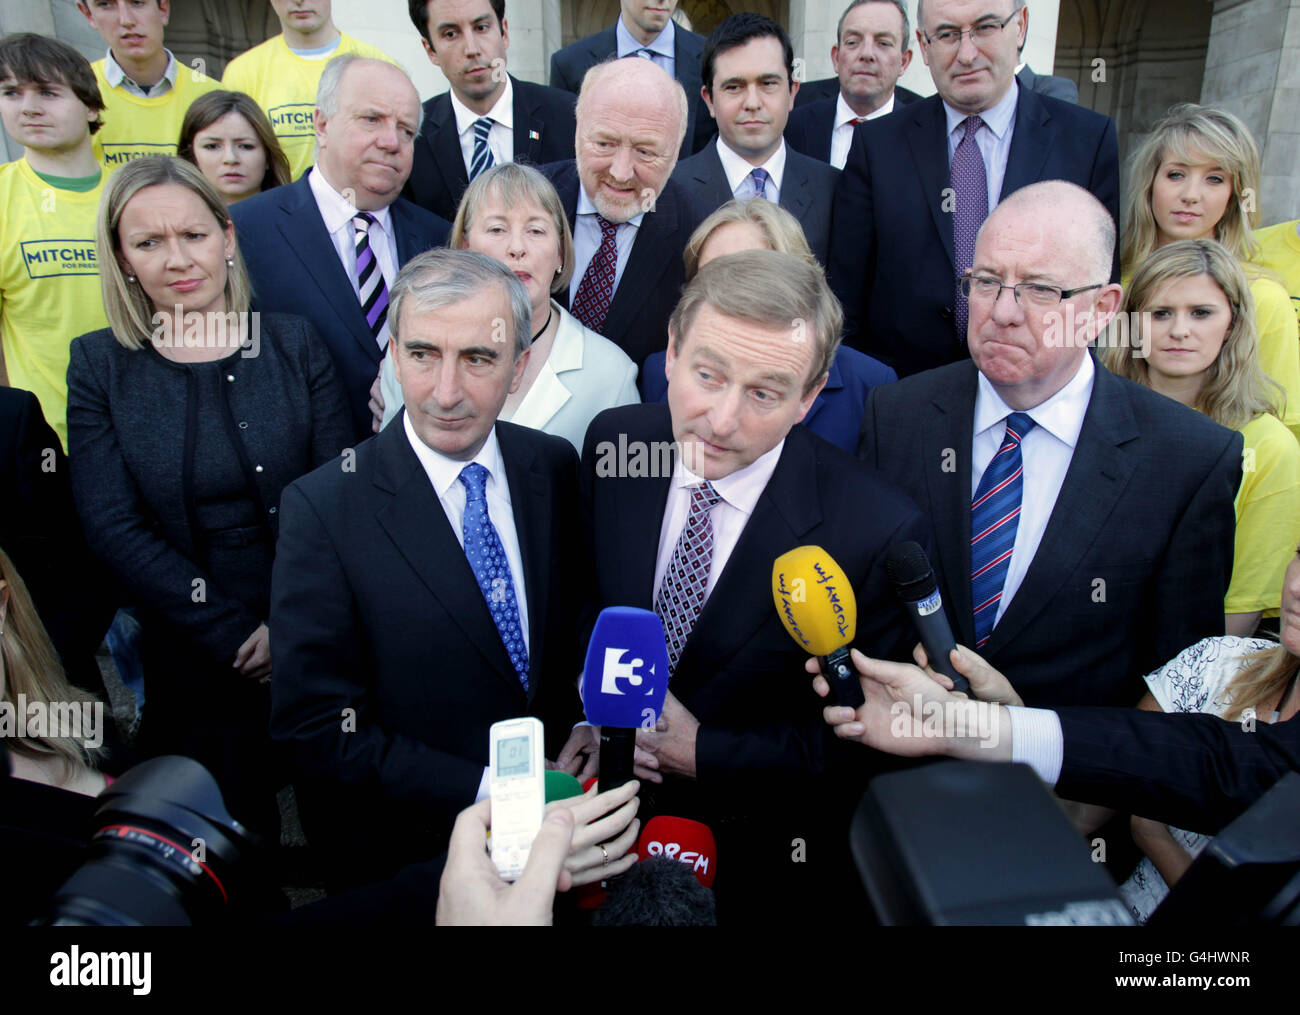 Fine Gael presidential candidate Gay Mitchell joins Taoiseach Enda Kenny to hand his nomination papers in at the Custom House in Dublin today. Stock Photo